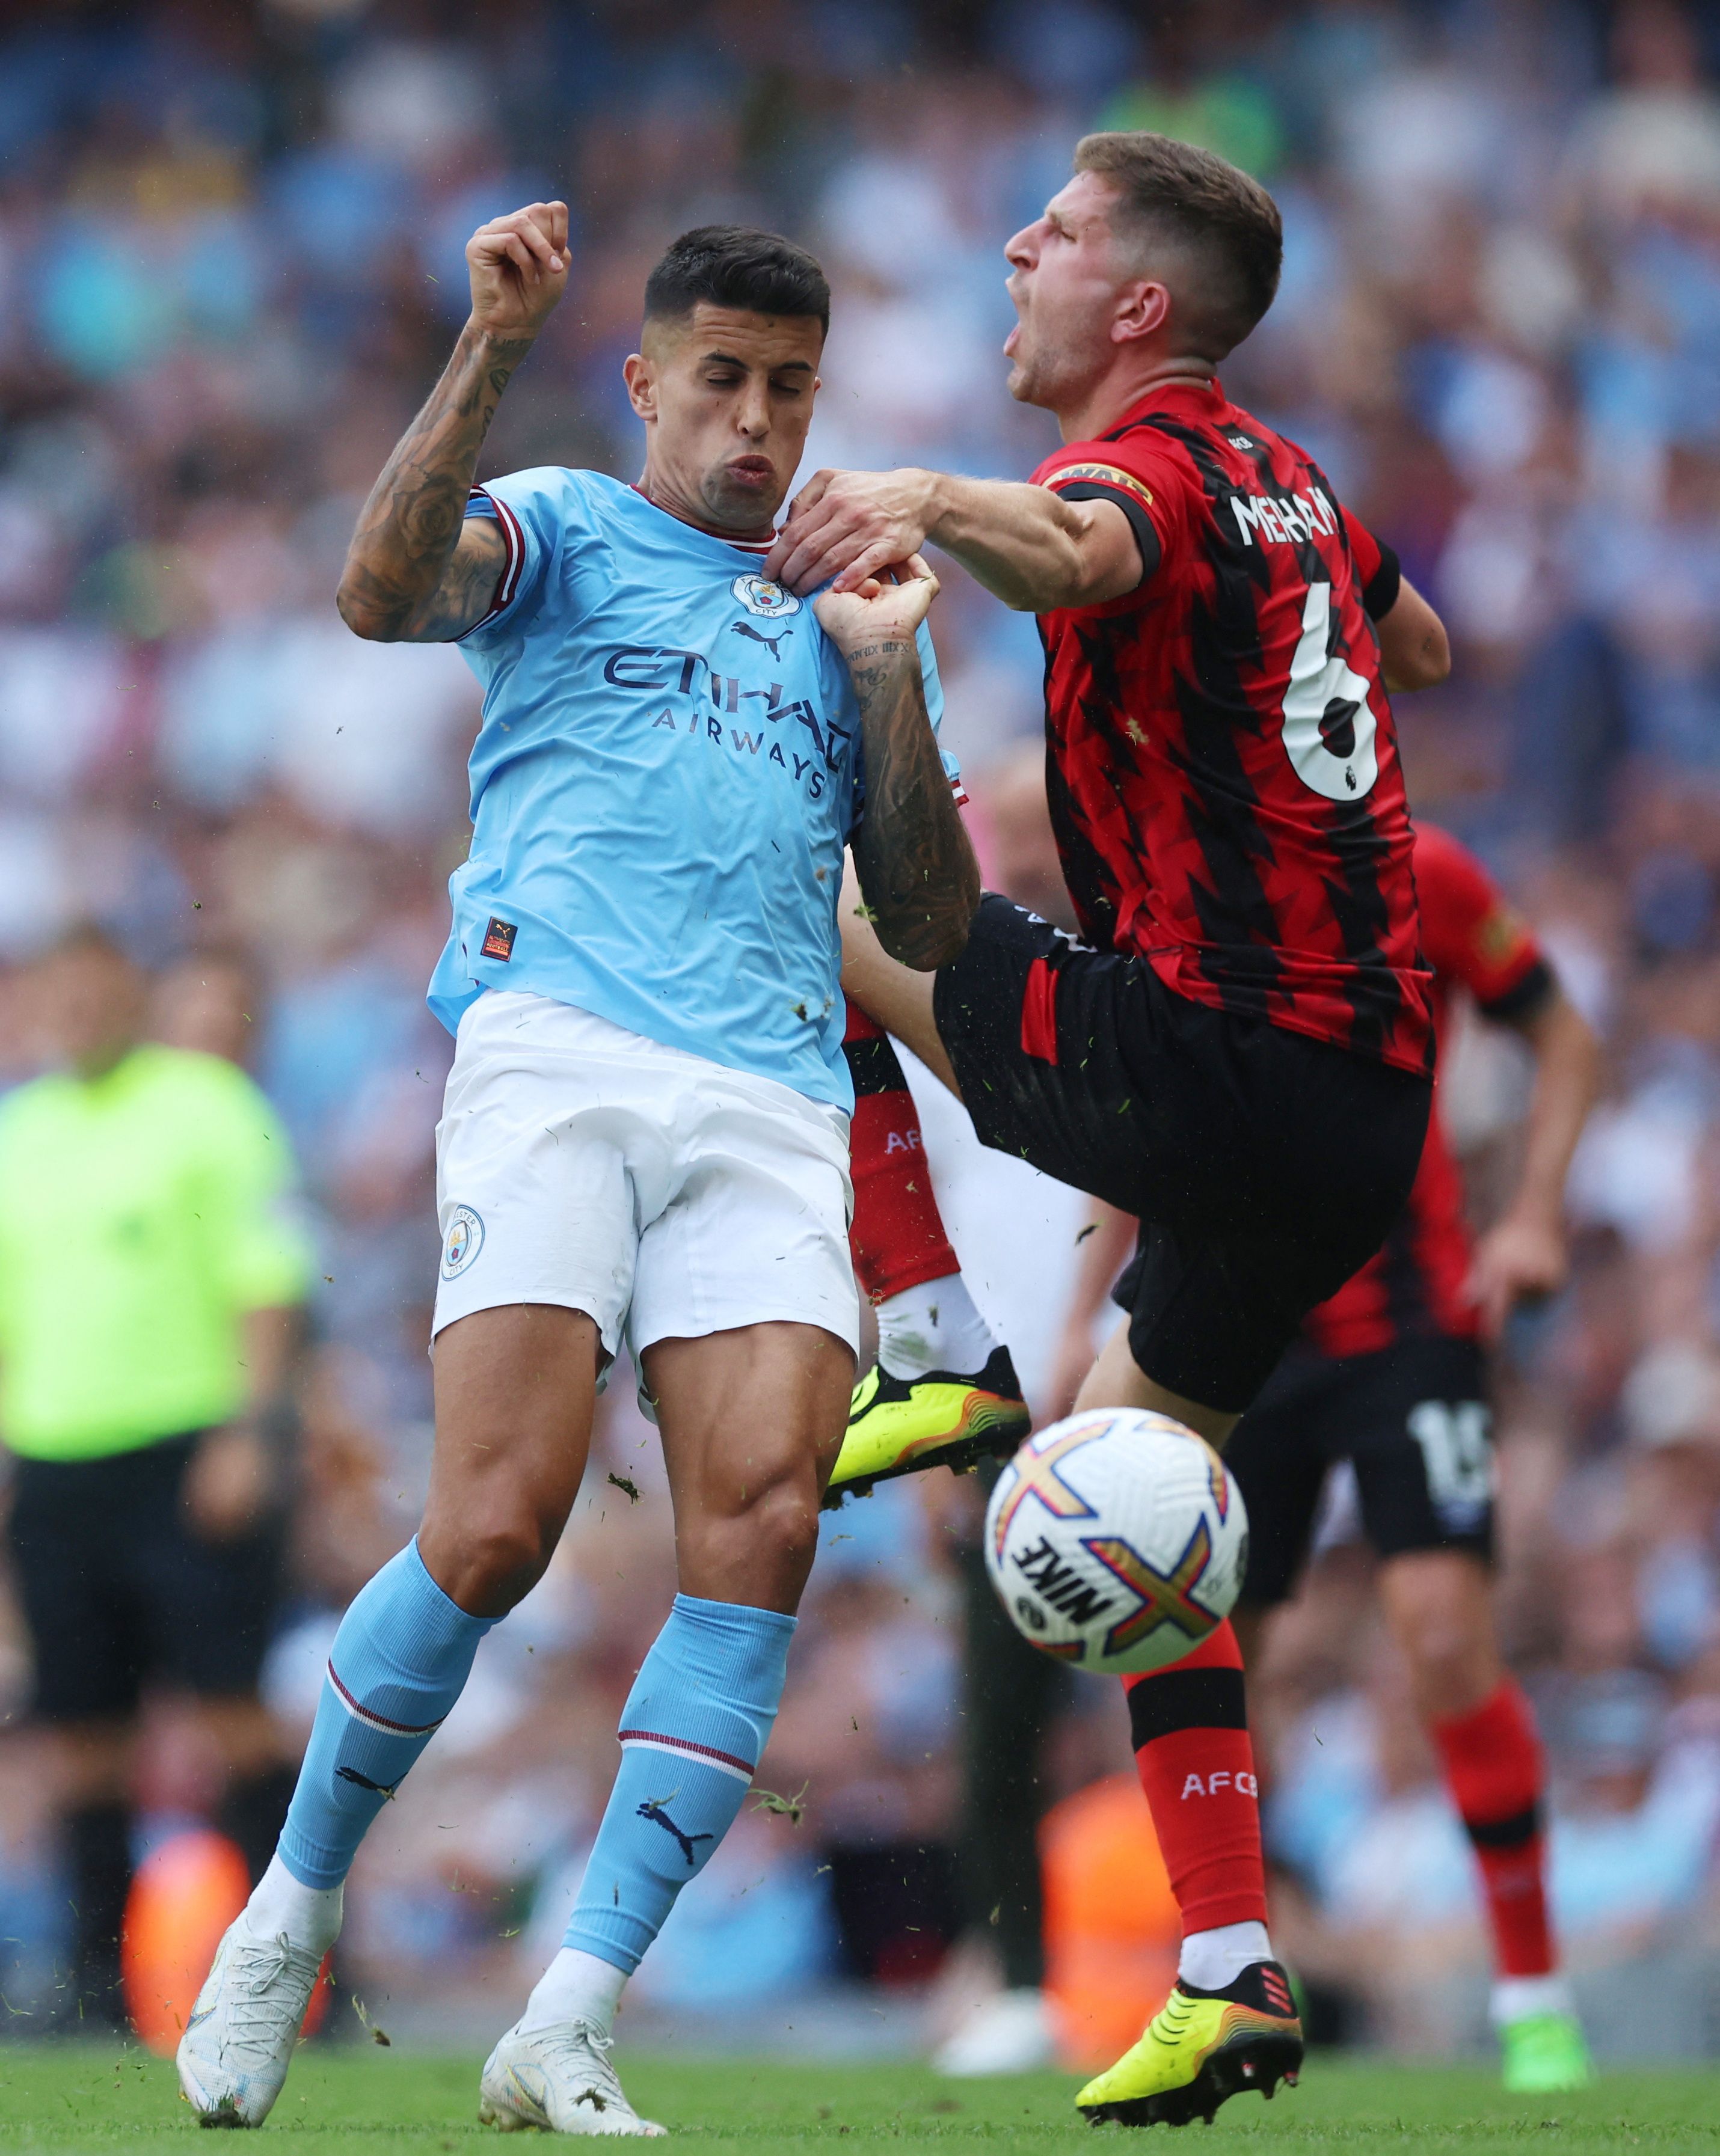 Man City's Cancelo in action.